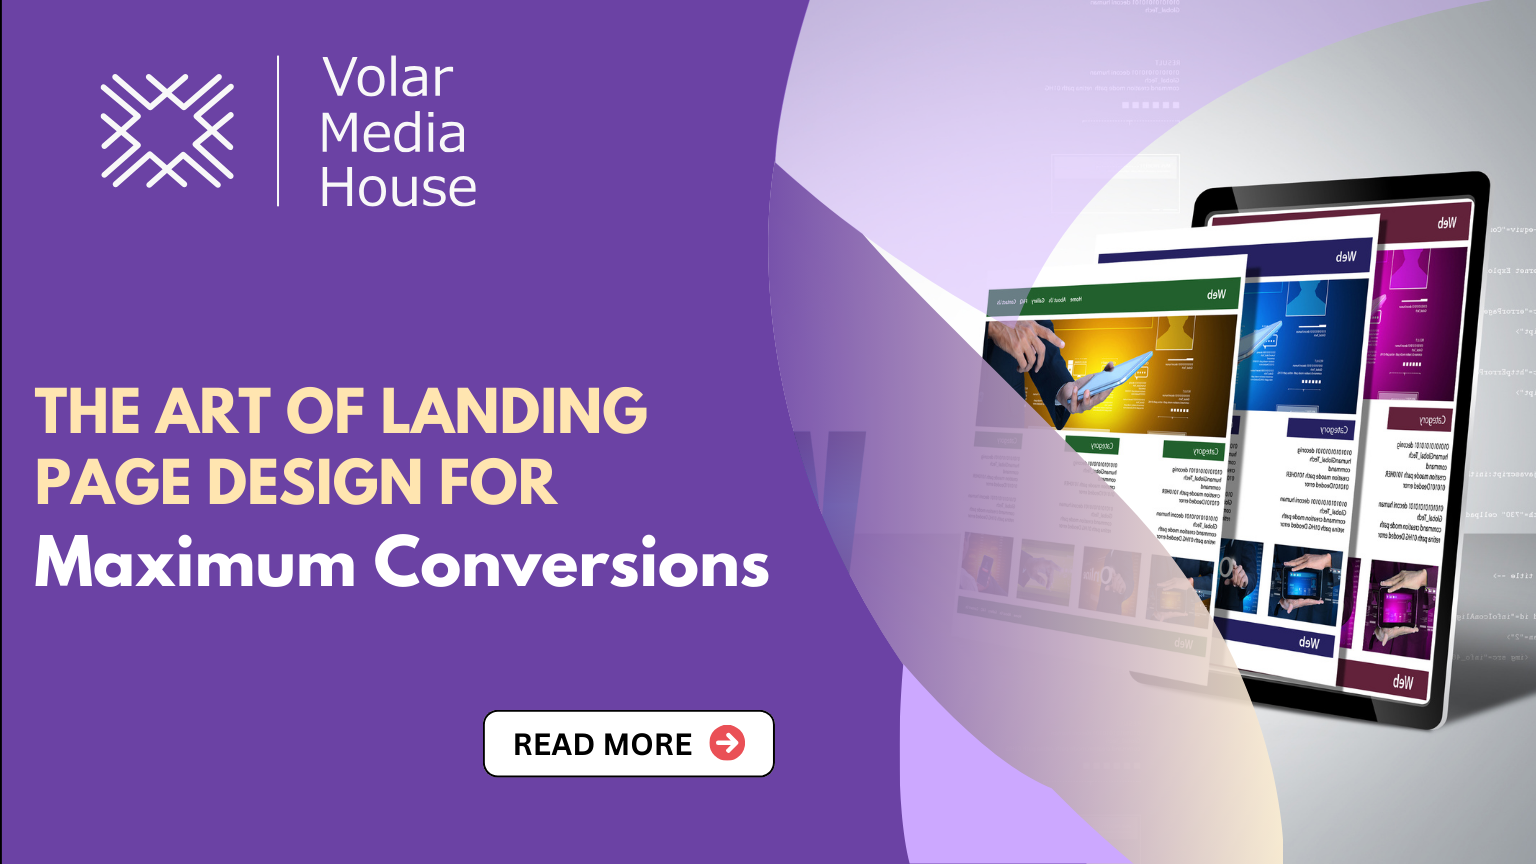 The Art of Landing Page Design for Maximum Conversions